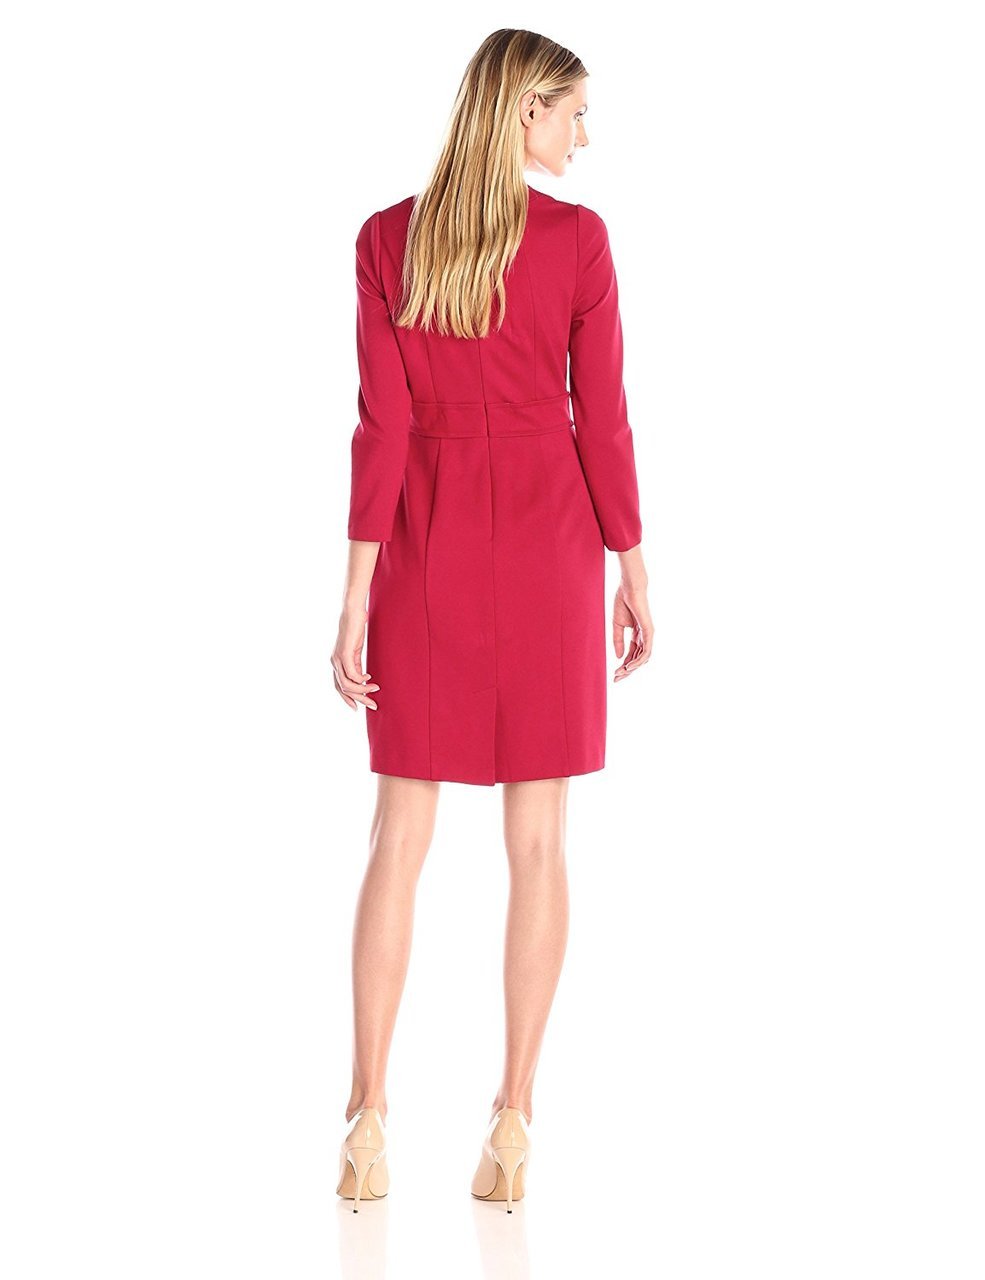 Adrianna Papell - Square Neck Ponte Dress 15246420 in Red